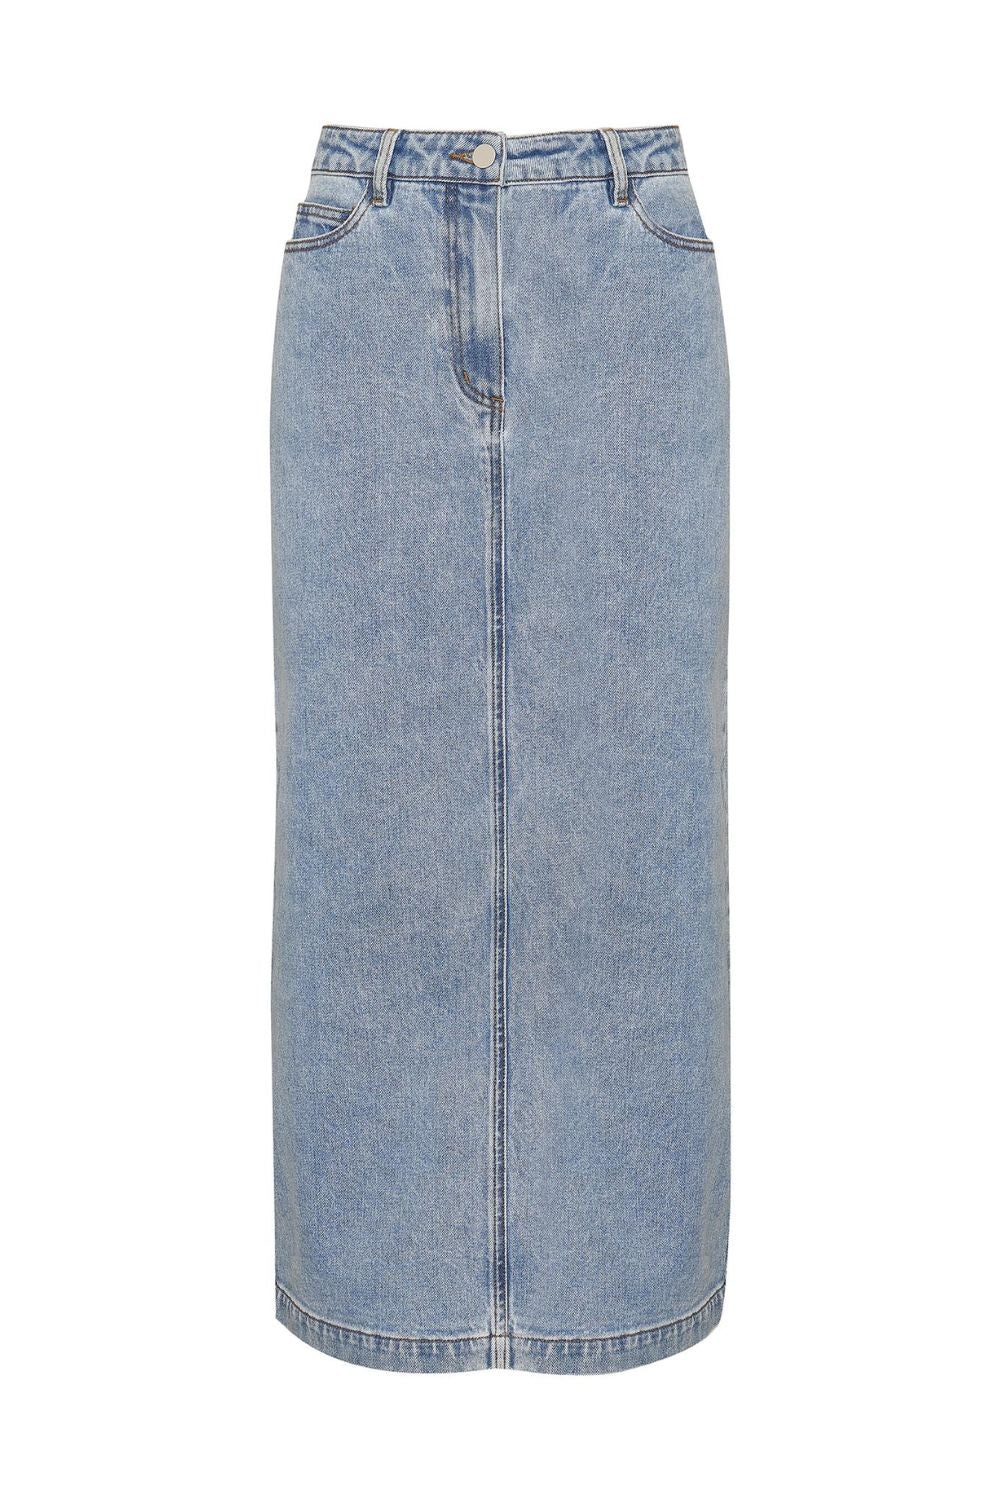 blue, midi skirt, denim midi skirt, denim skirt, side and back pockets, product image